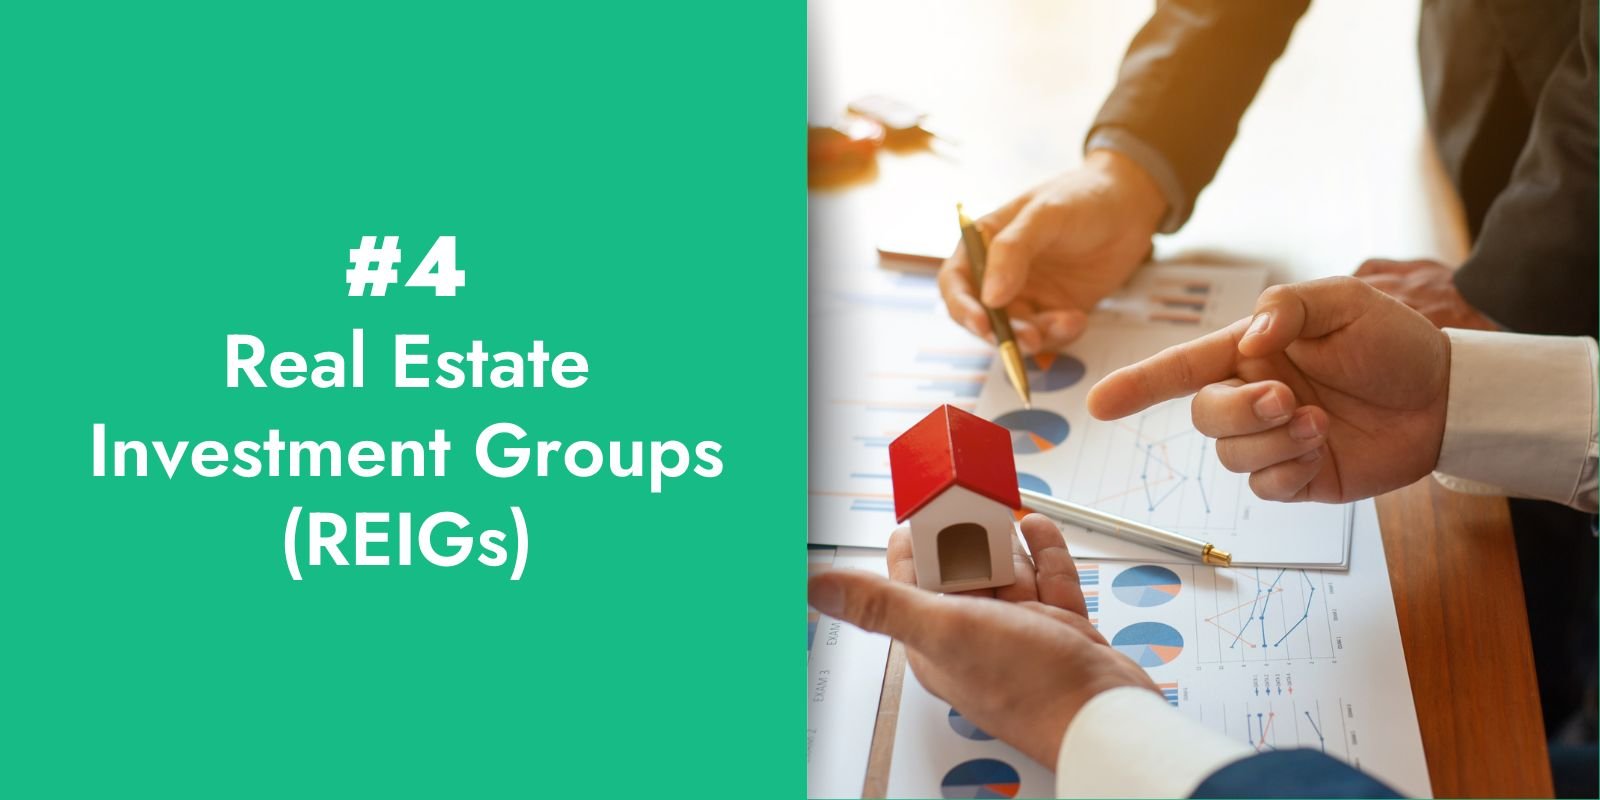 4. Real Estate Investment Groups (REIGs)